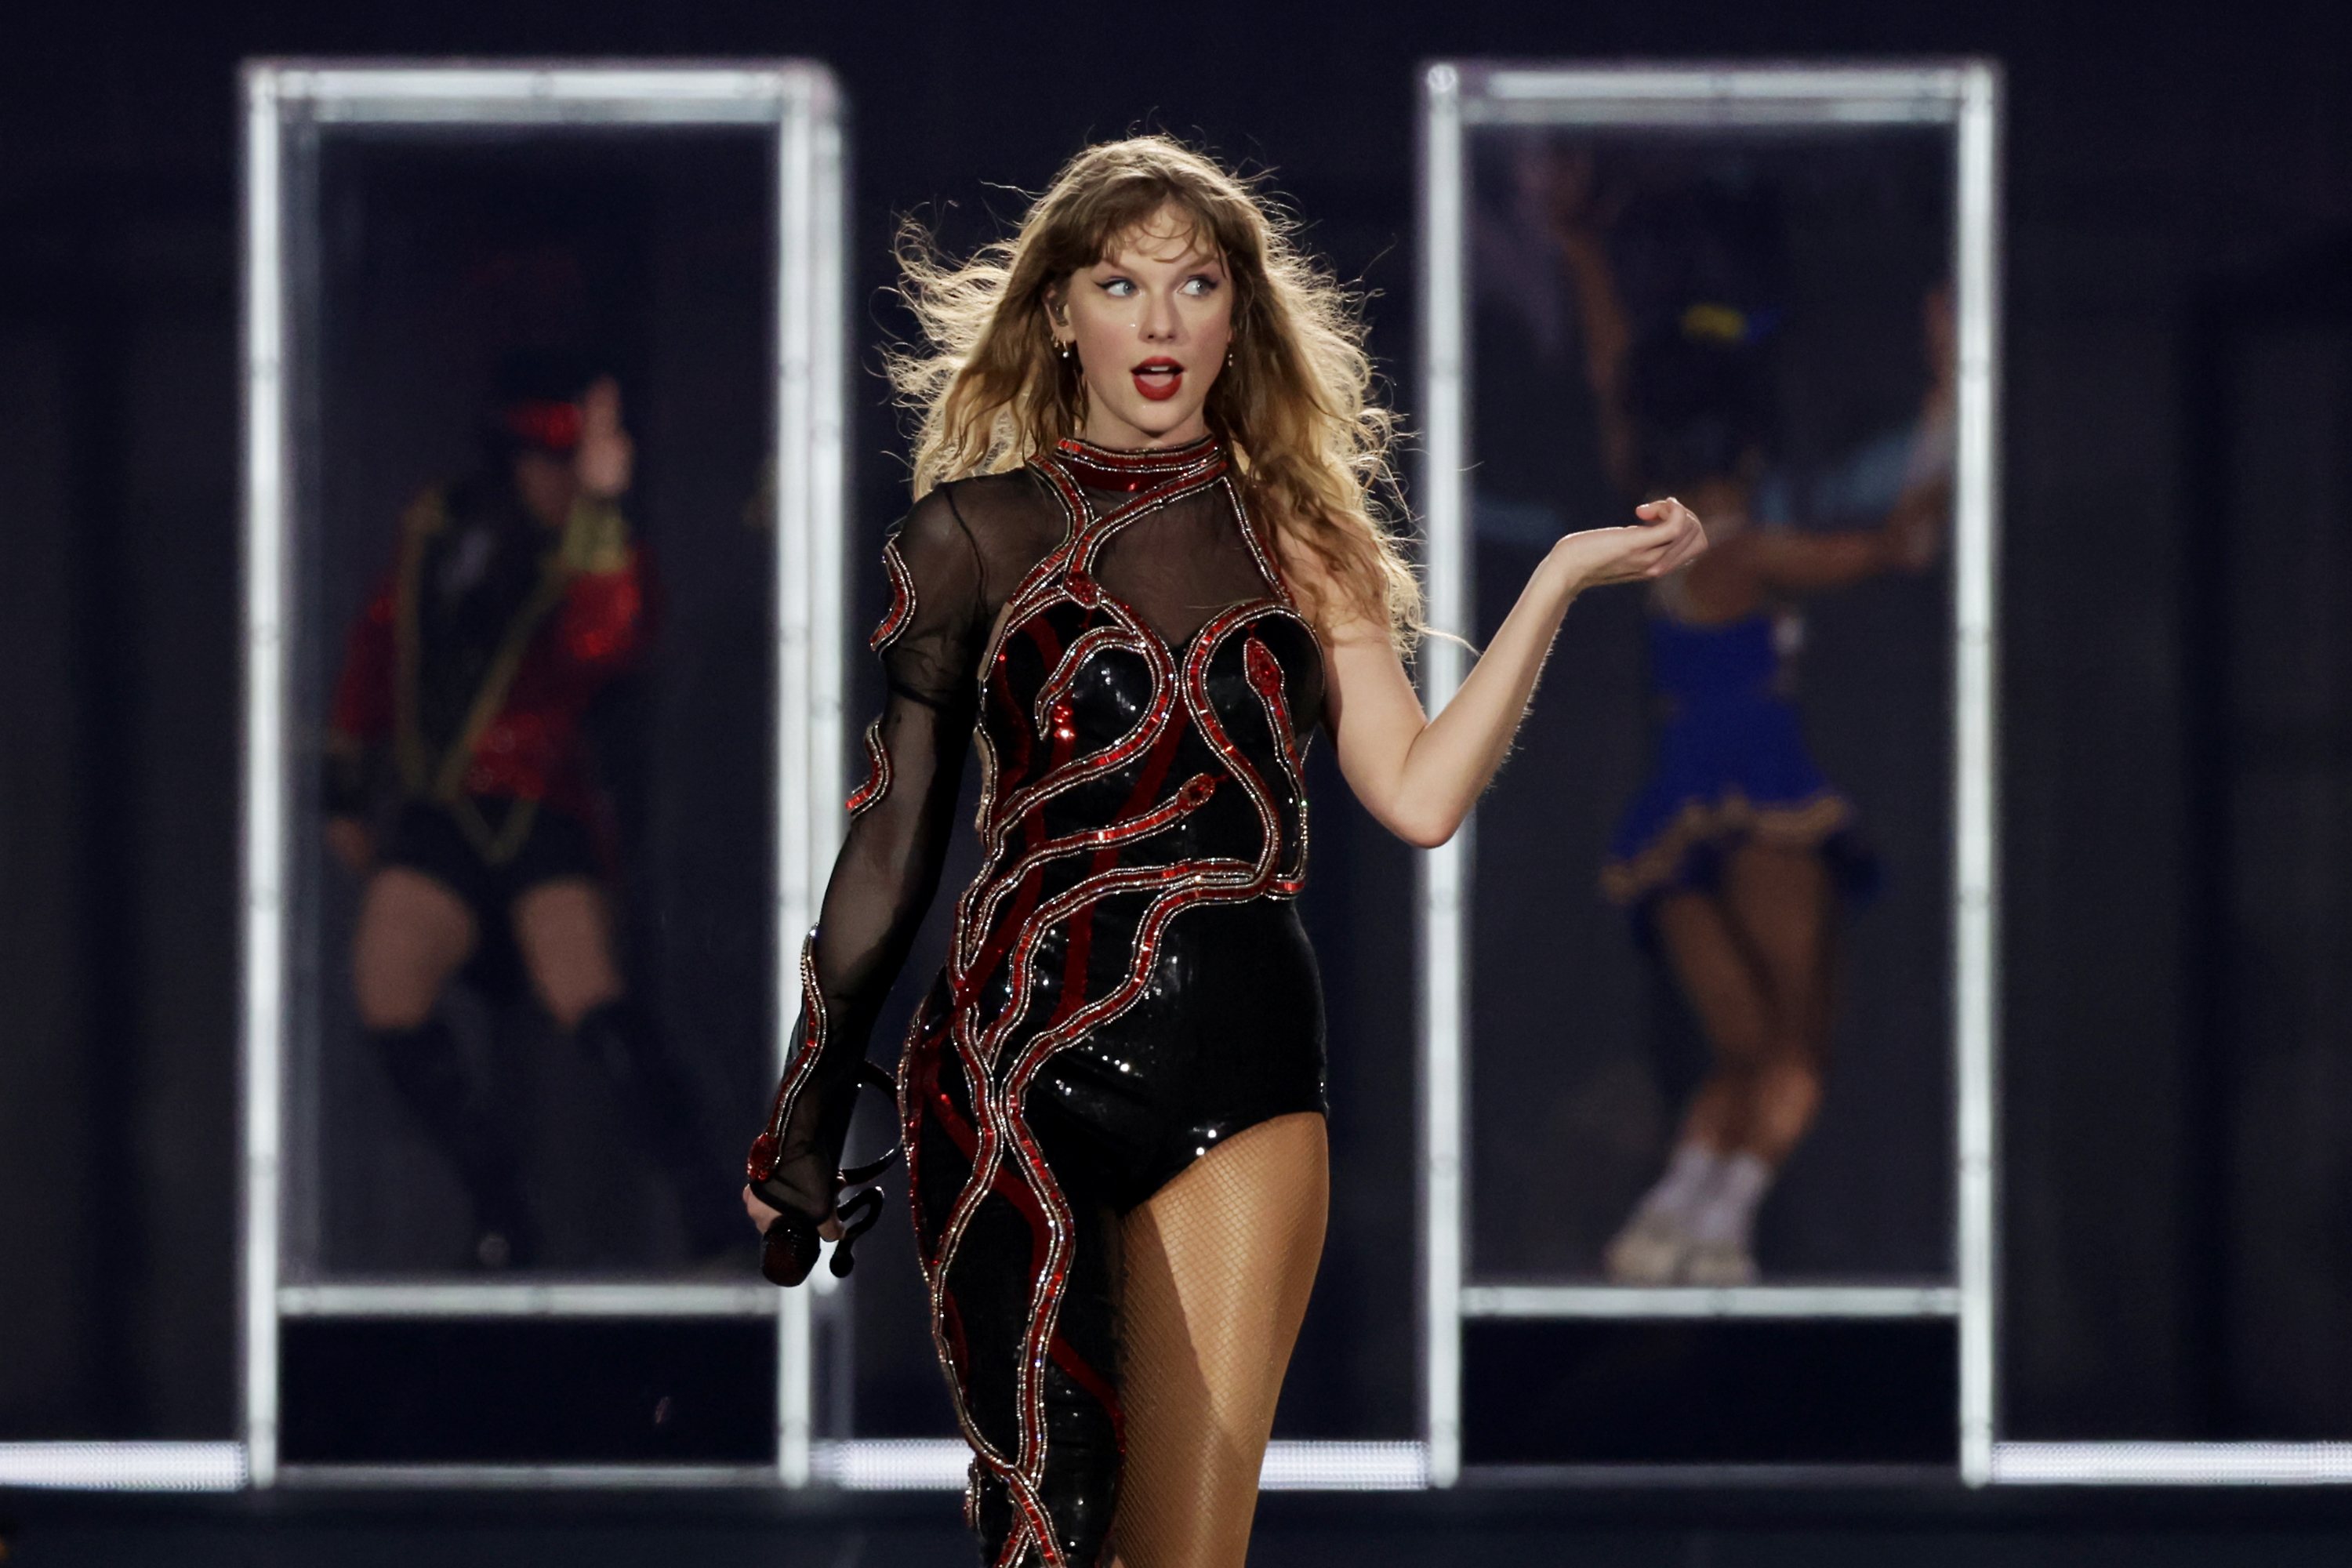 Taylor Swift performing on stage in a sequined outfit with backup dancers in the background